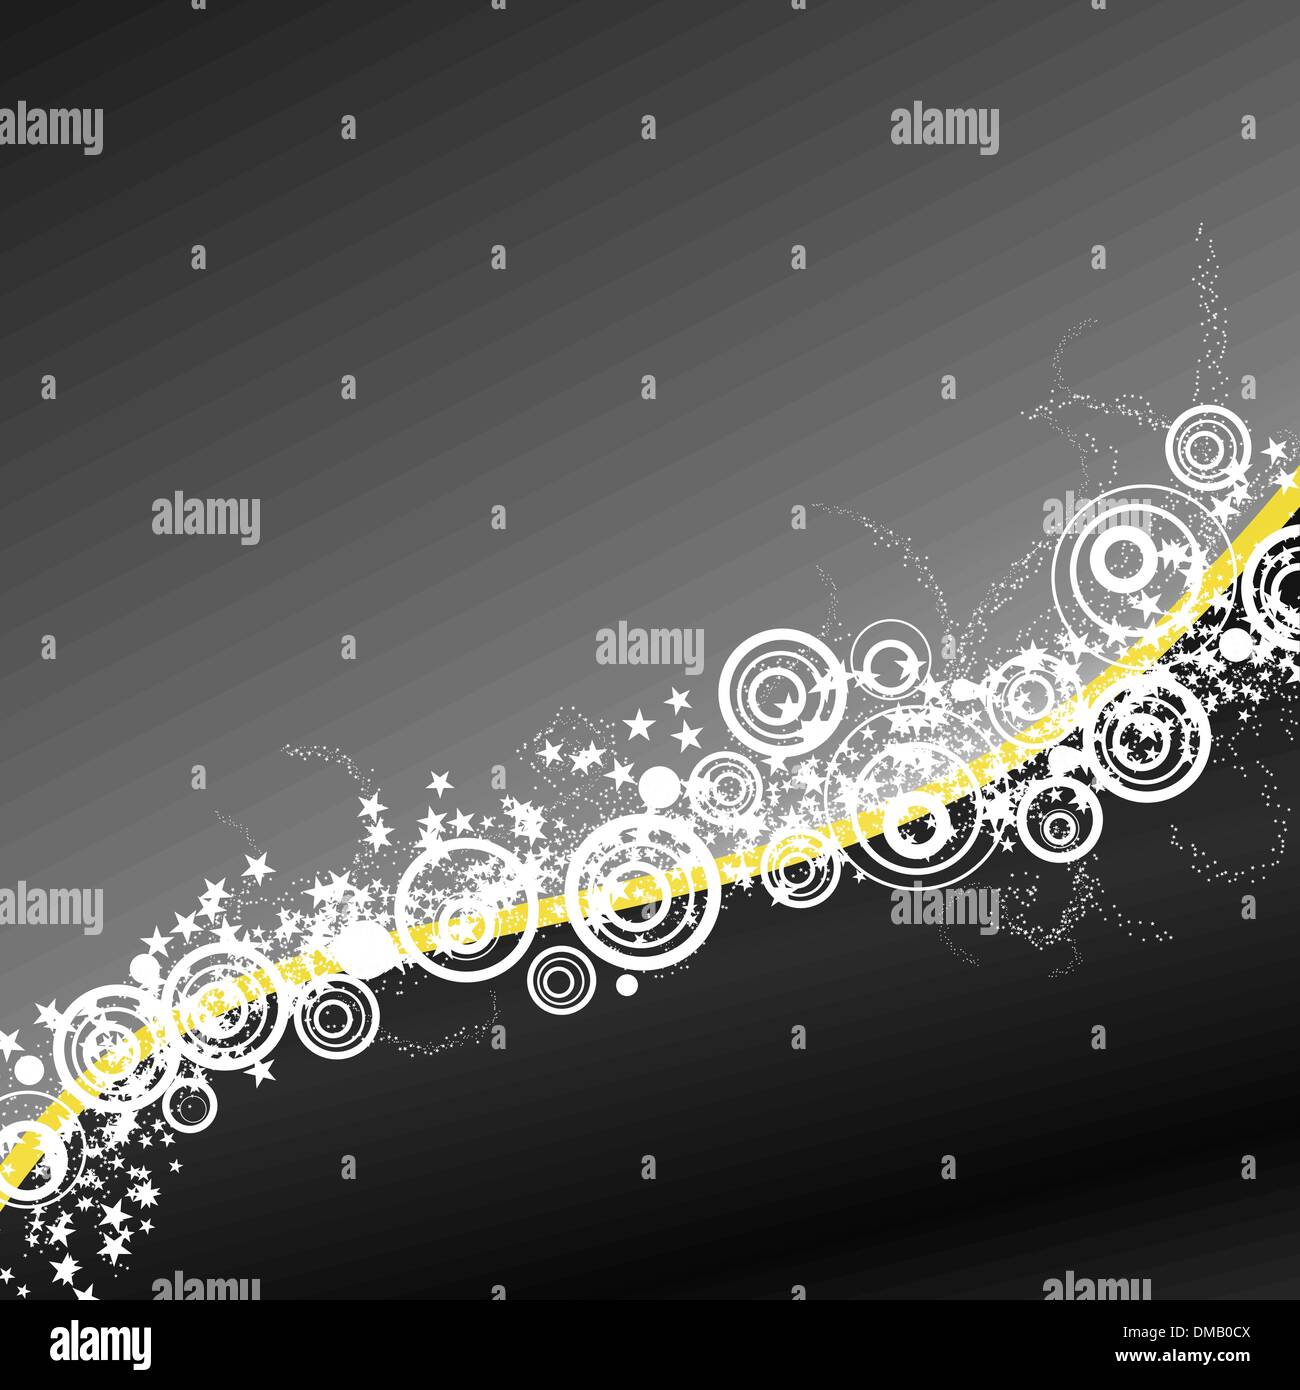 Black celebration background with millions of stars Stock Vector